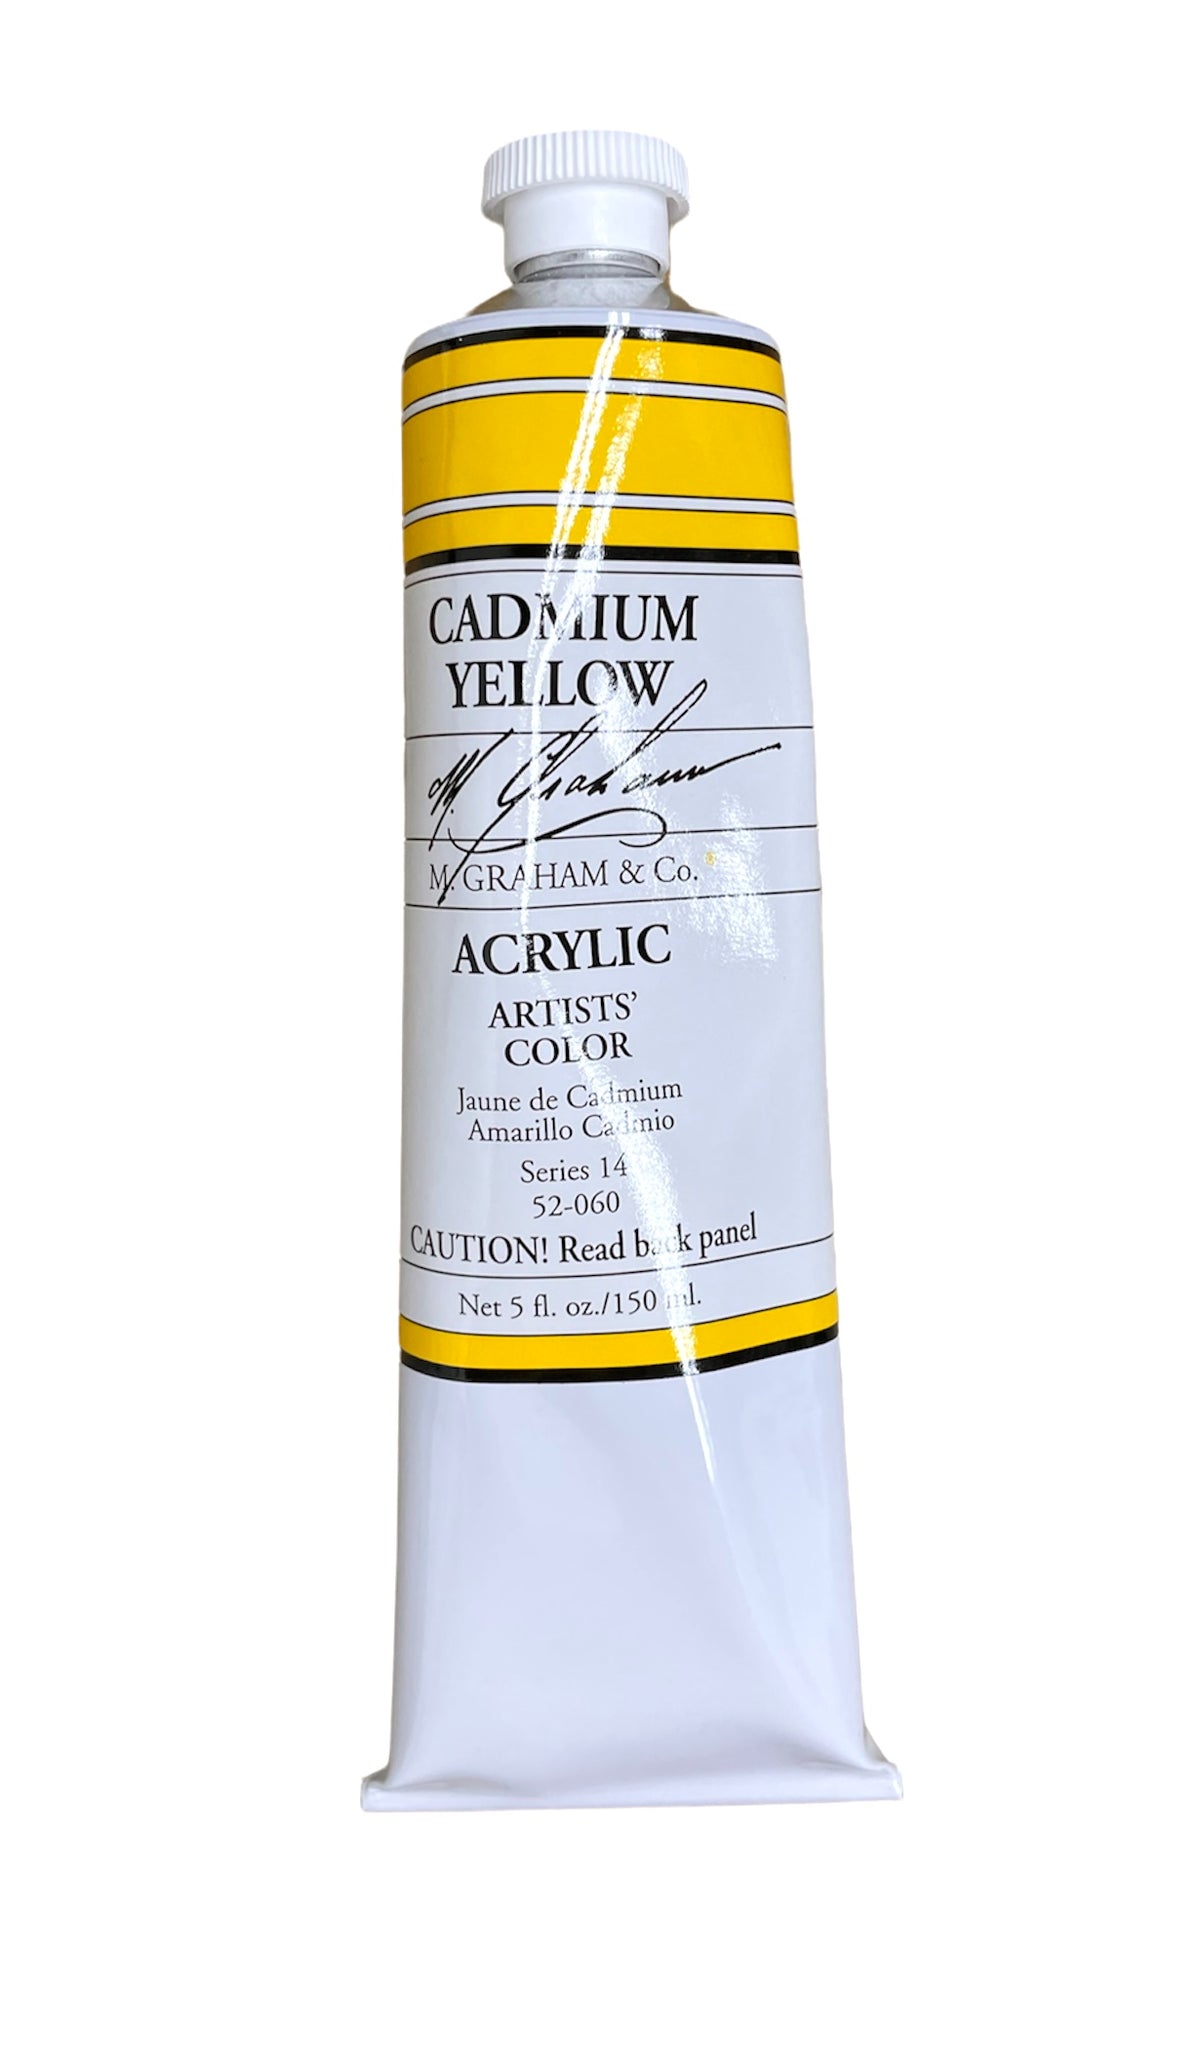 M. Graham Acrylic Cadmium Yellow in 150ml. Available in Drawing Etc. Art Supplies store, Singapore